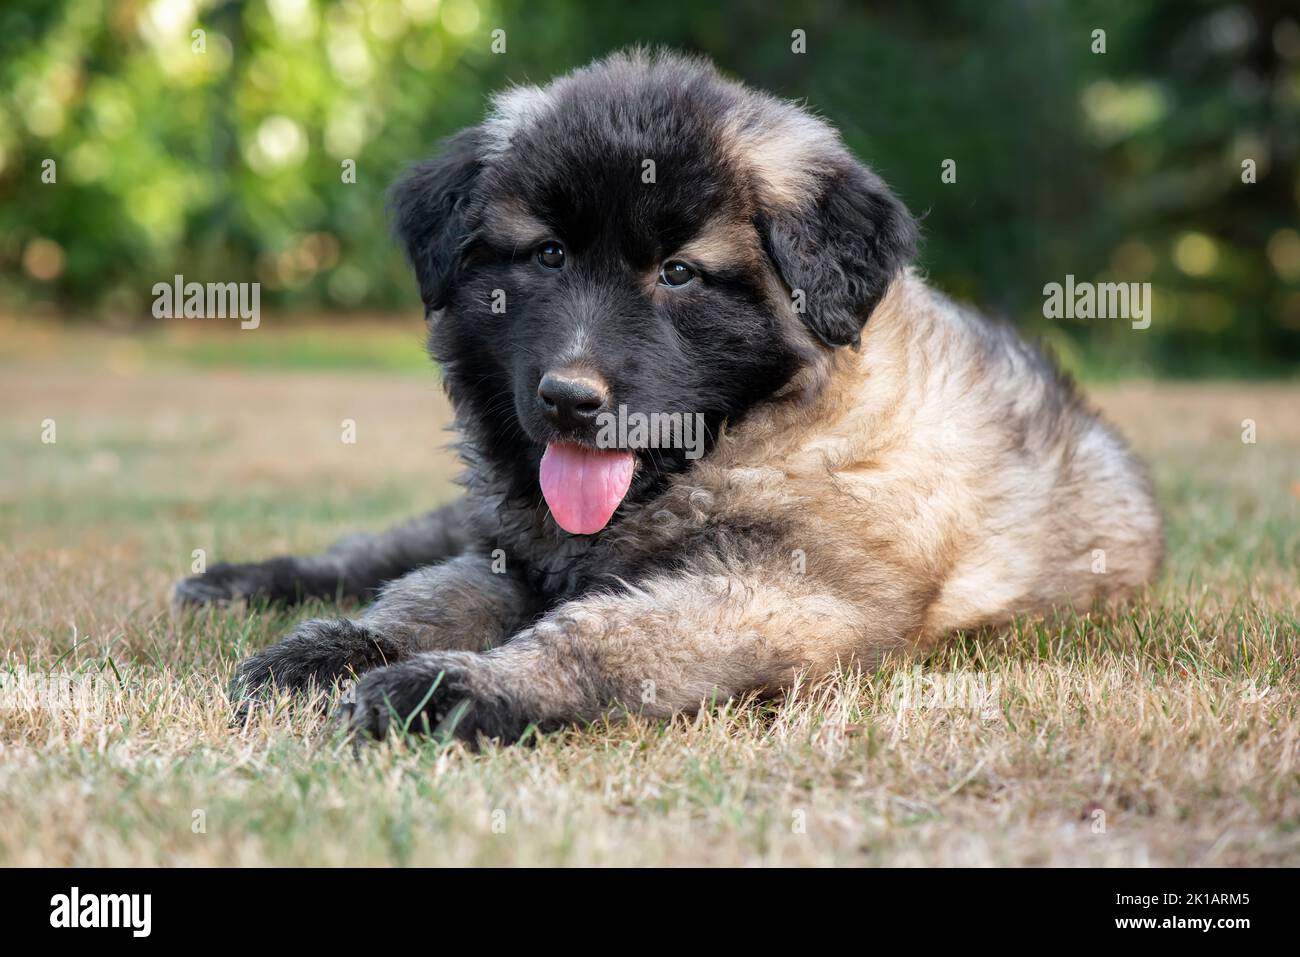 Two months old Estrela Mountain Dog puppy.It is a large breed of dog from the Estrela Mountains of Portugal bred to guard herds and homesteads.It is'o Stock Photo